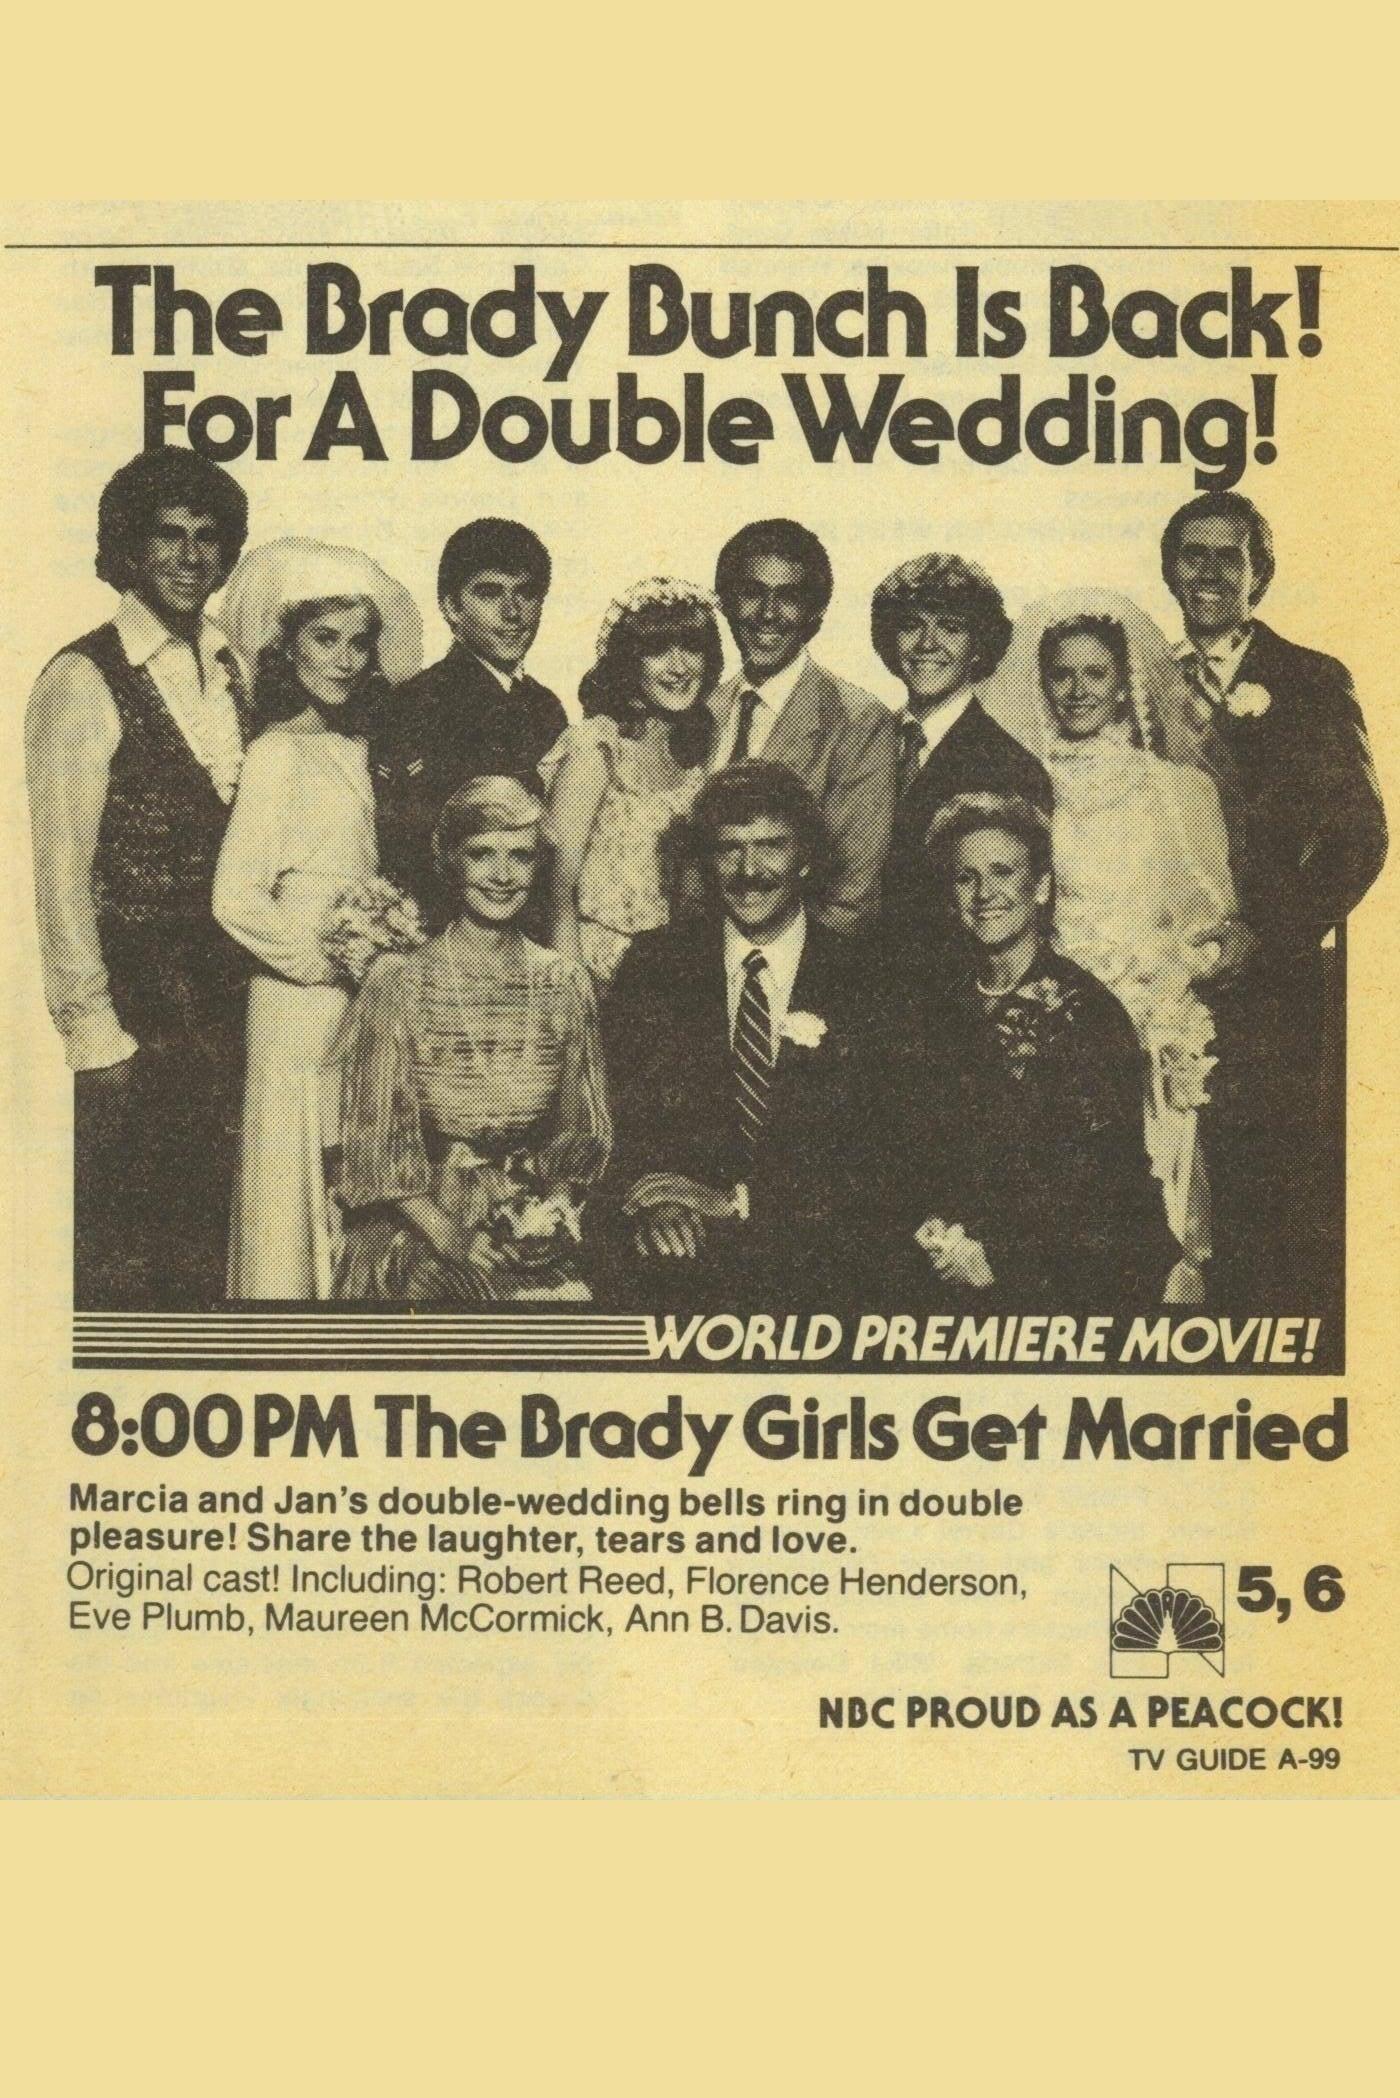 The Brady Girls Get Married poster